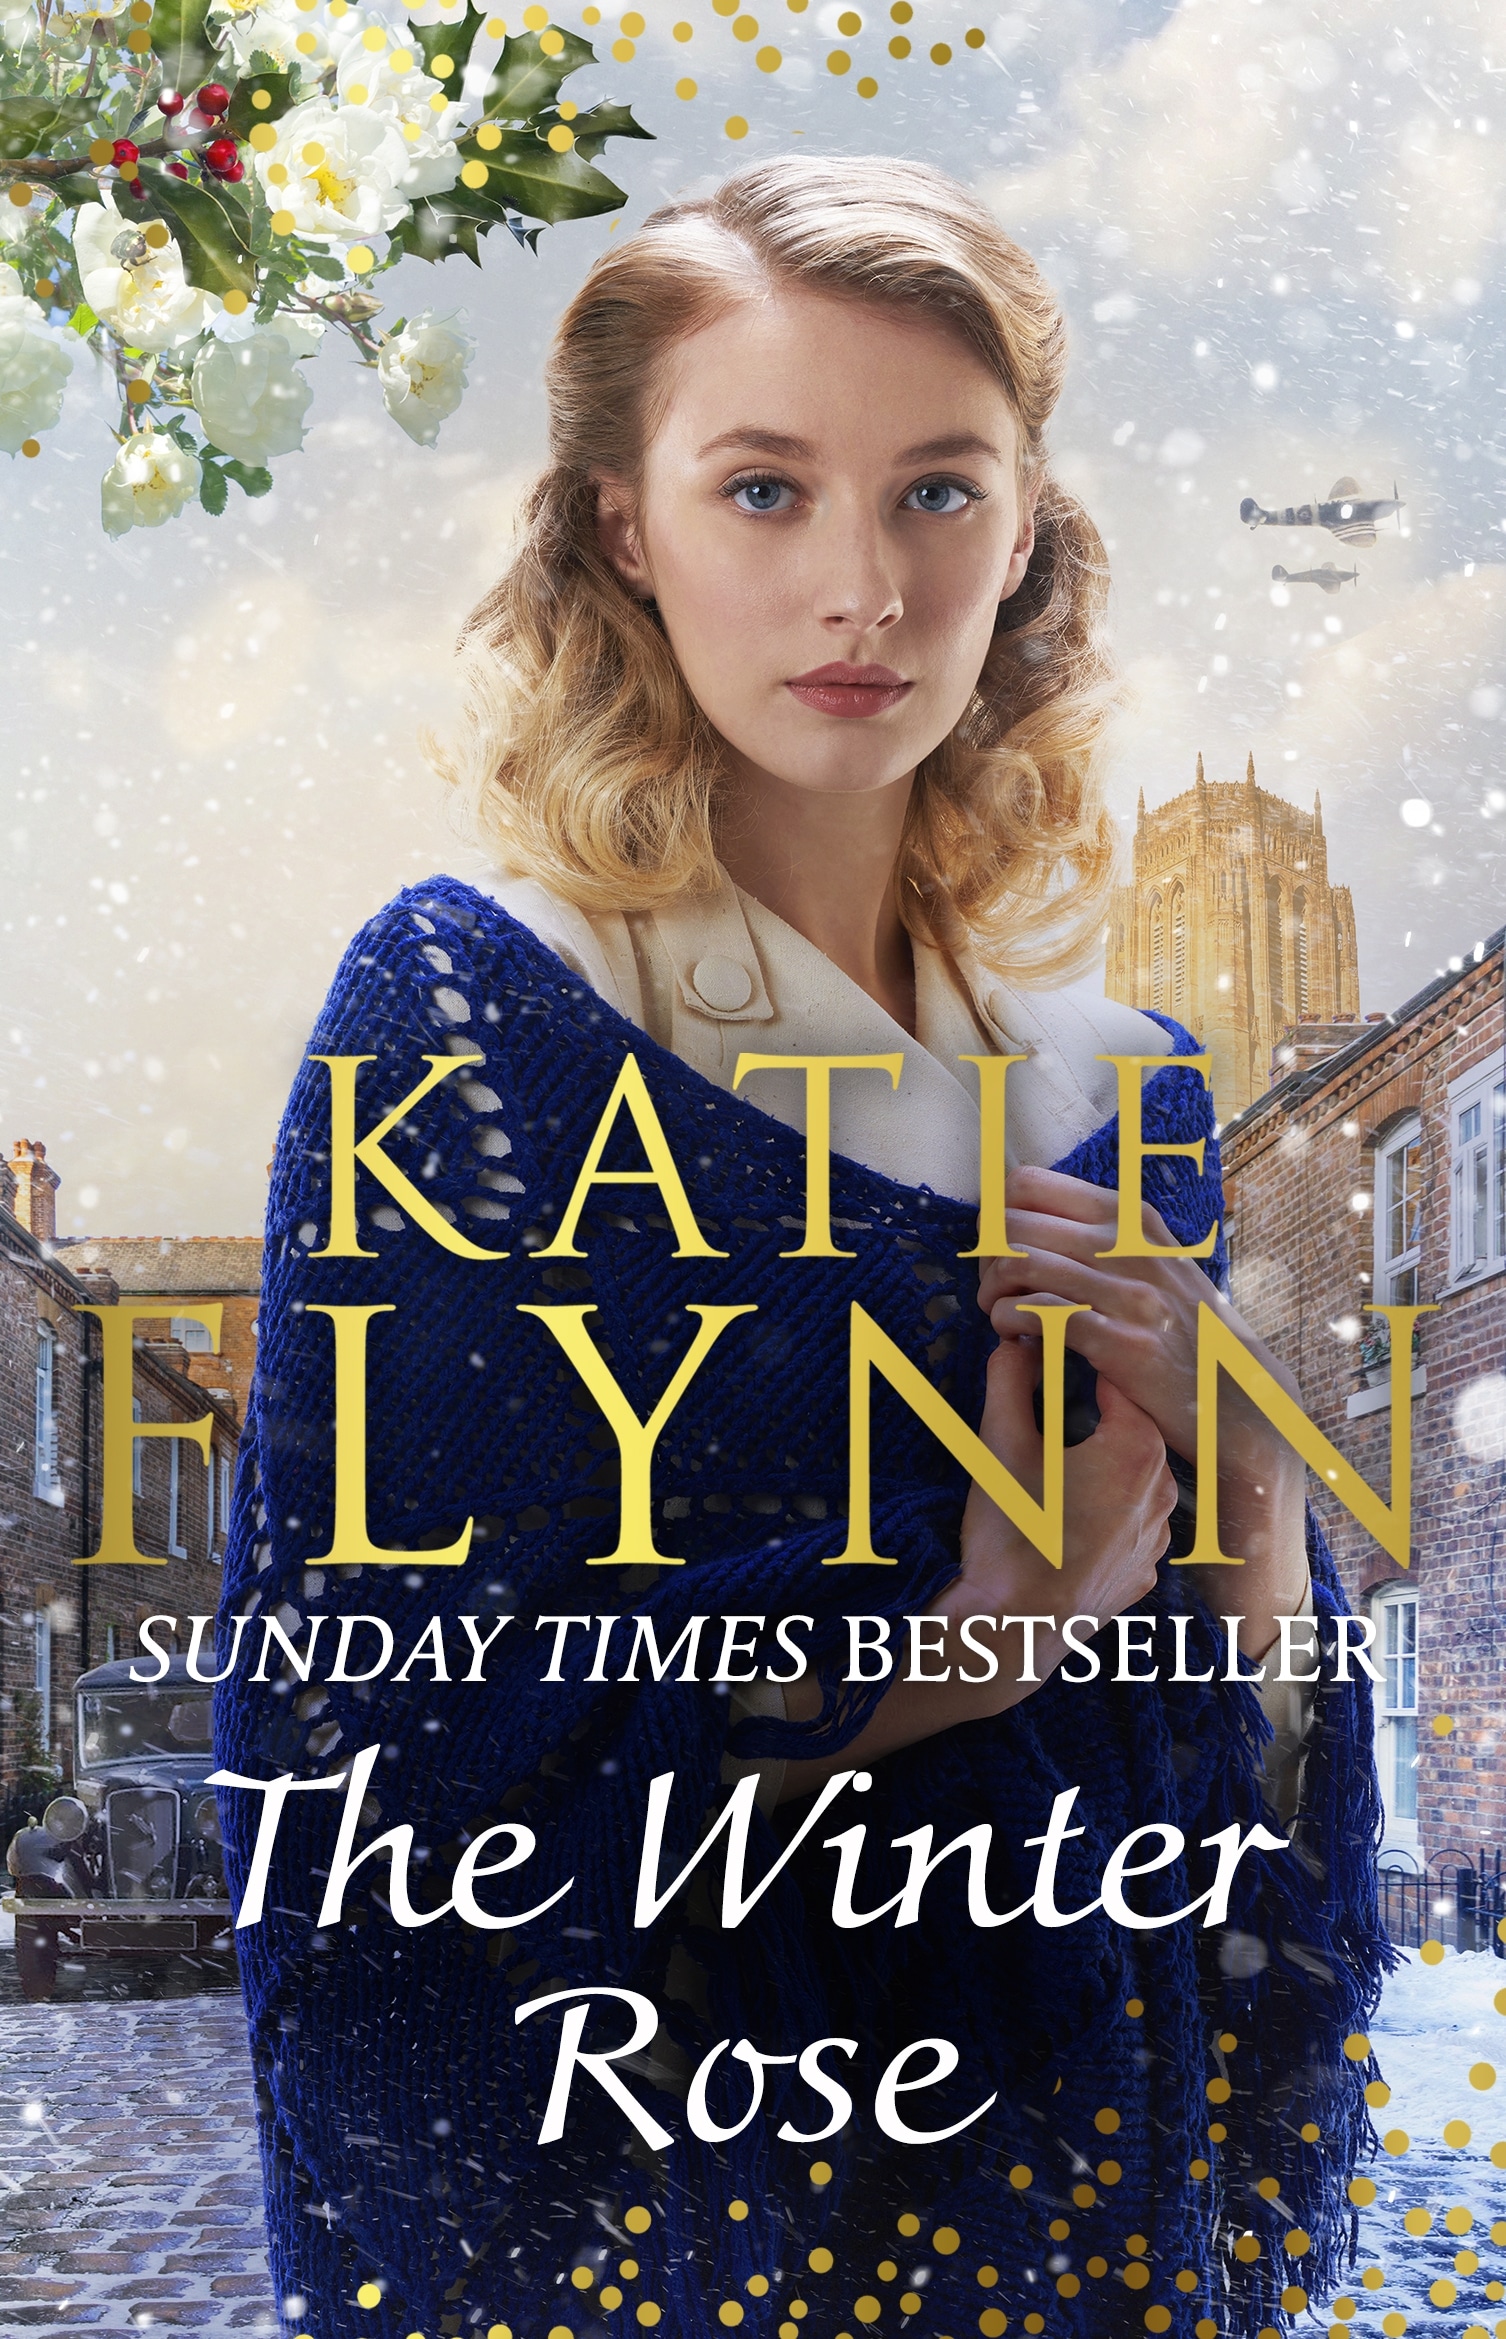 Book “The Winter Rose” by Katie Flynn — August 25, 2022